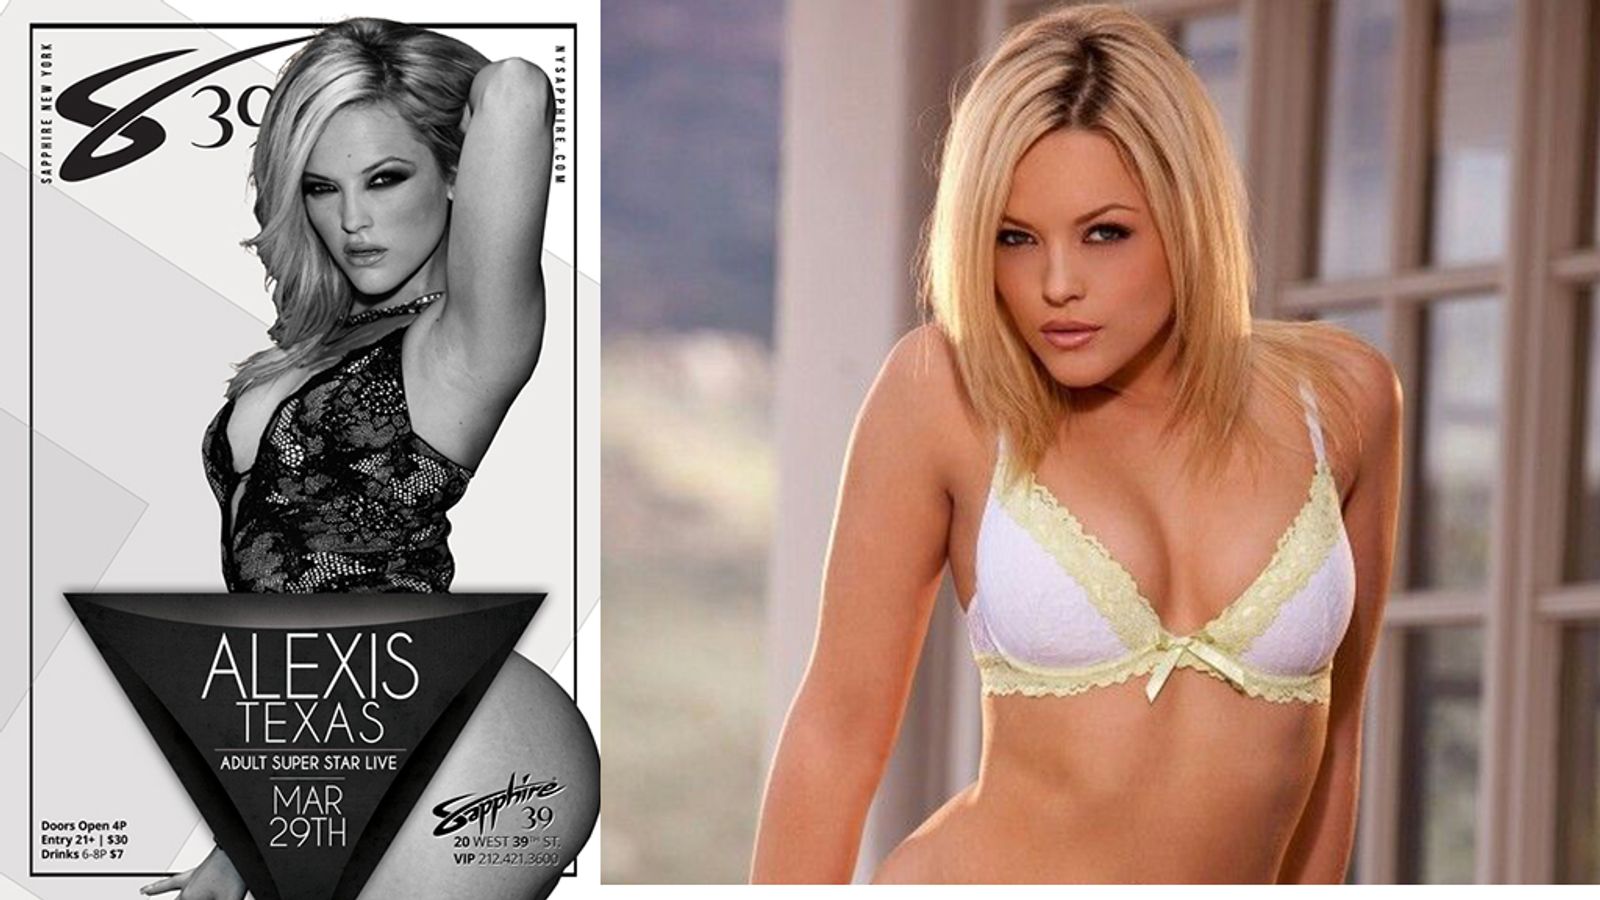 Alexis Texas Heads To NYC To Feature at Sapphire 39